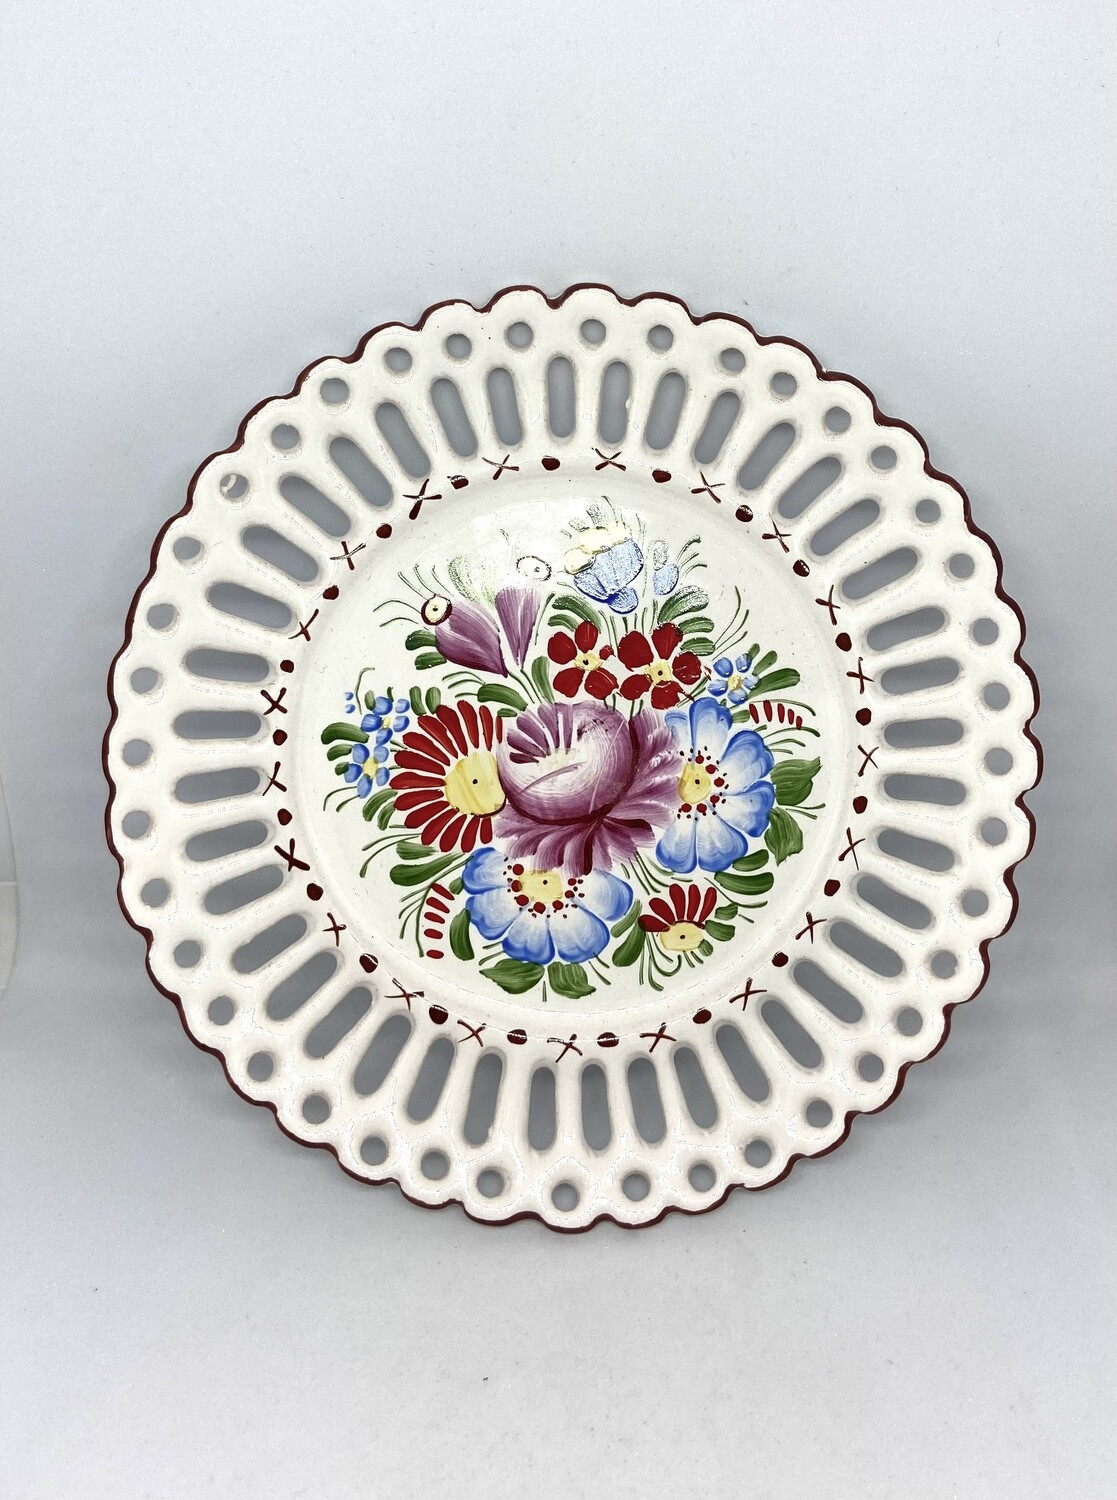 Hand Painted Floral Saucer 6”